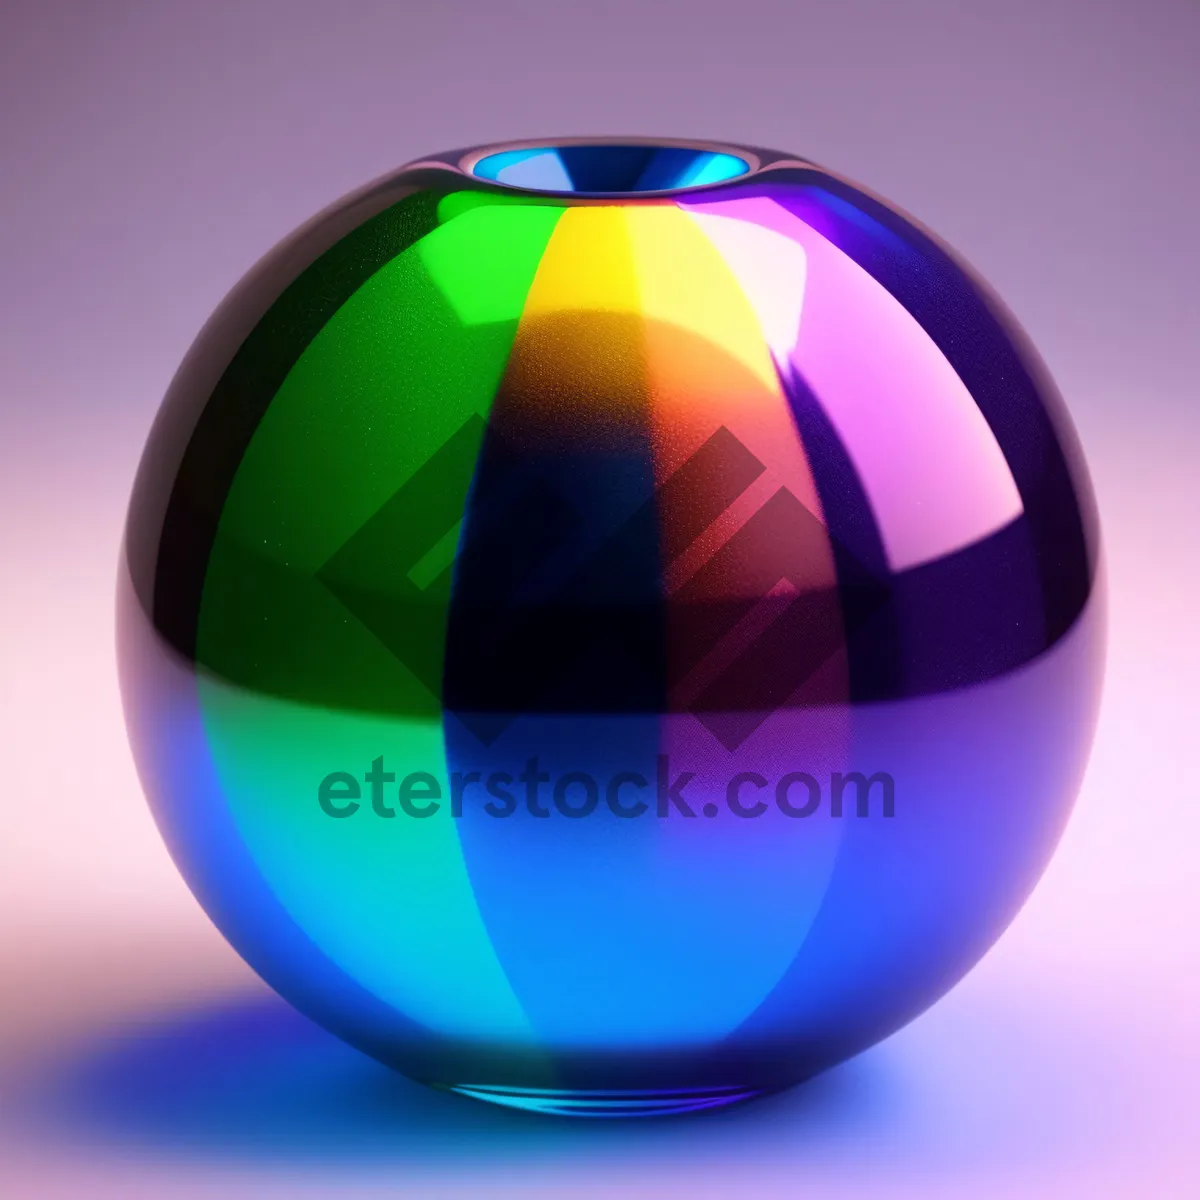 Picture of Spherical World: Iconic Glass Globe for Global Design